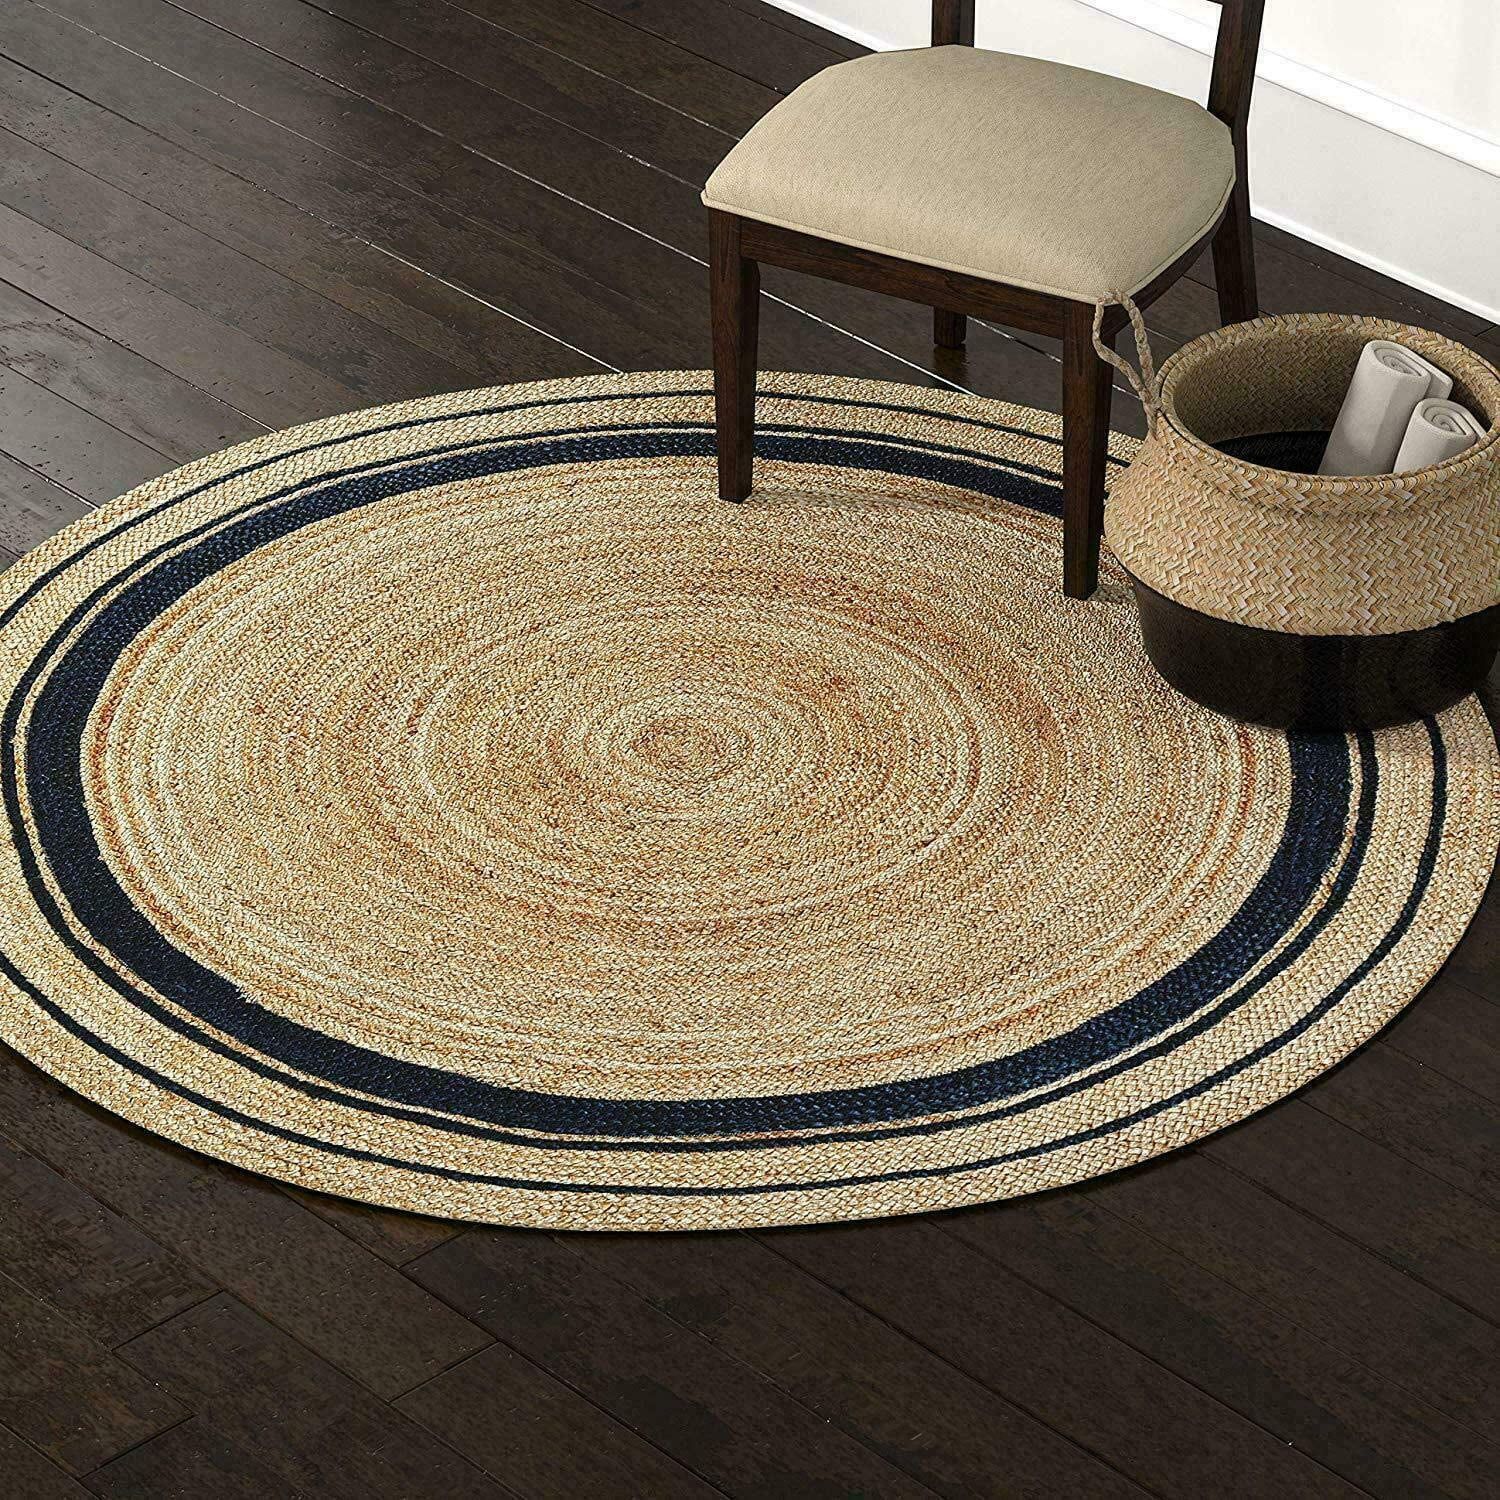 Black Border Handmade Hand Woven Boho Braided Jute Area Rug Natural Fibers Round  Rugs For Living Room, Kitchen, Indoor & Outdoor Carpet  2” Feet (24 Inch) –  Walmart Pertaining To Border Round Rugs (View 4 of 15)